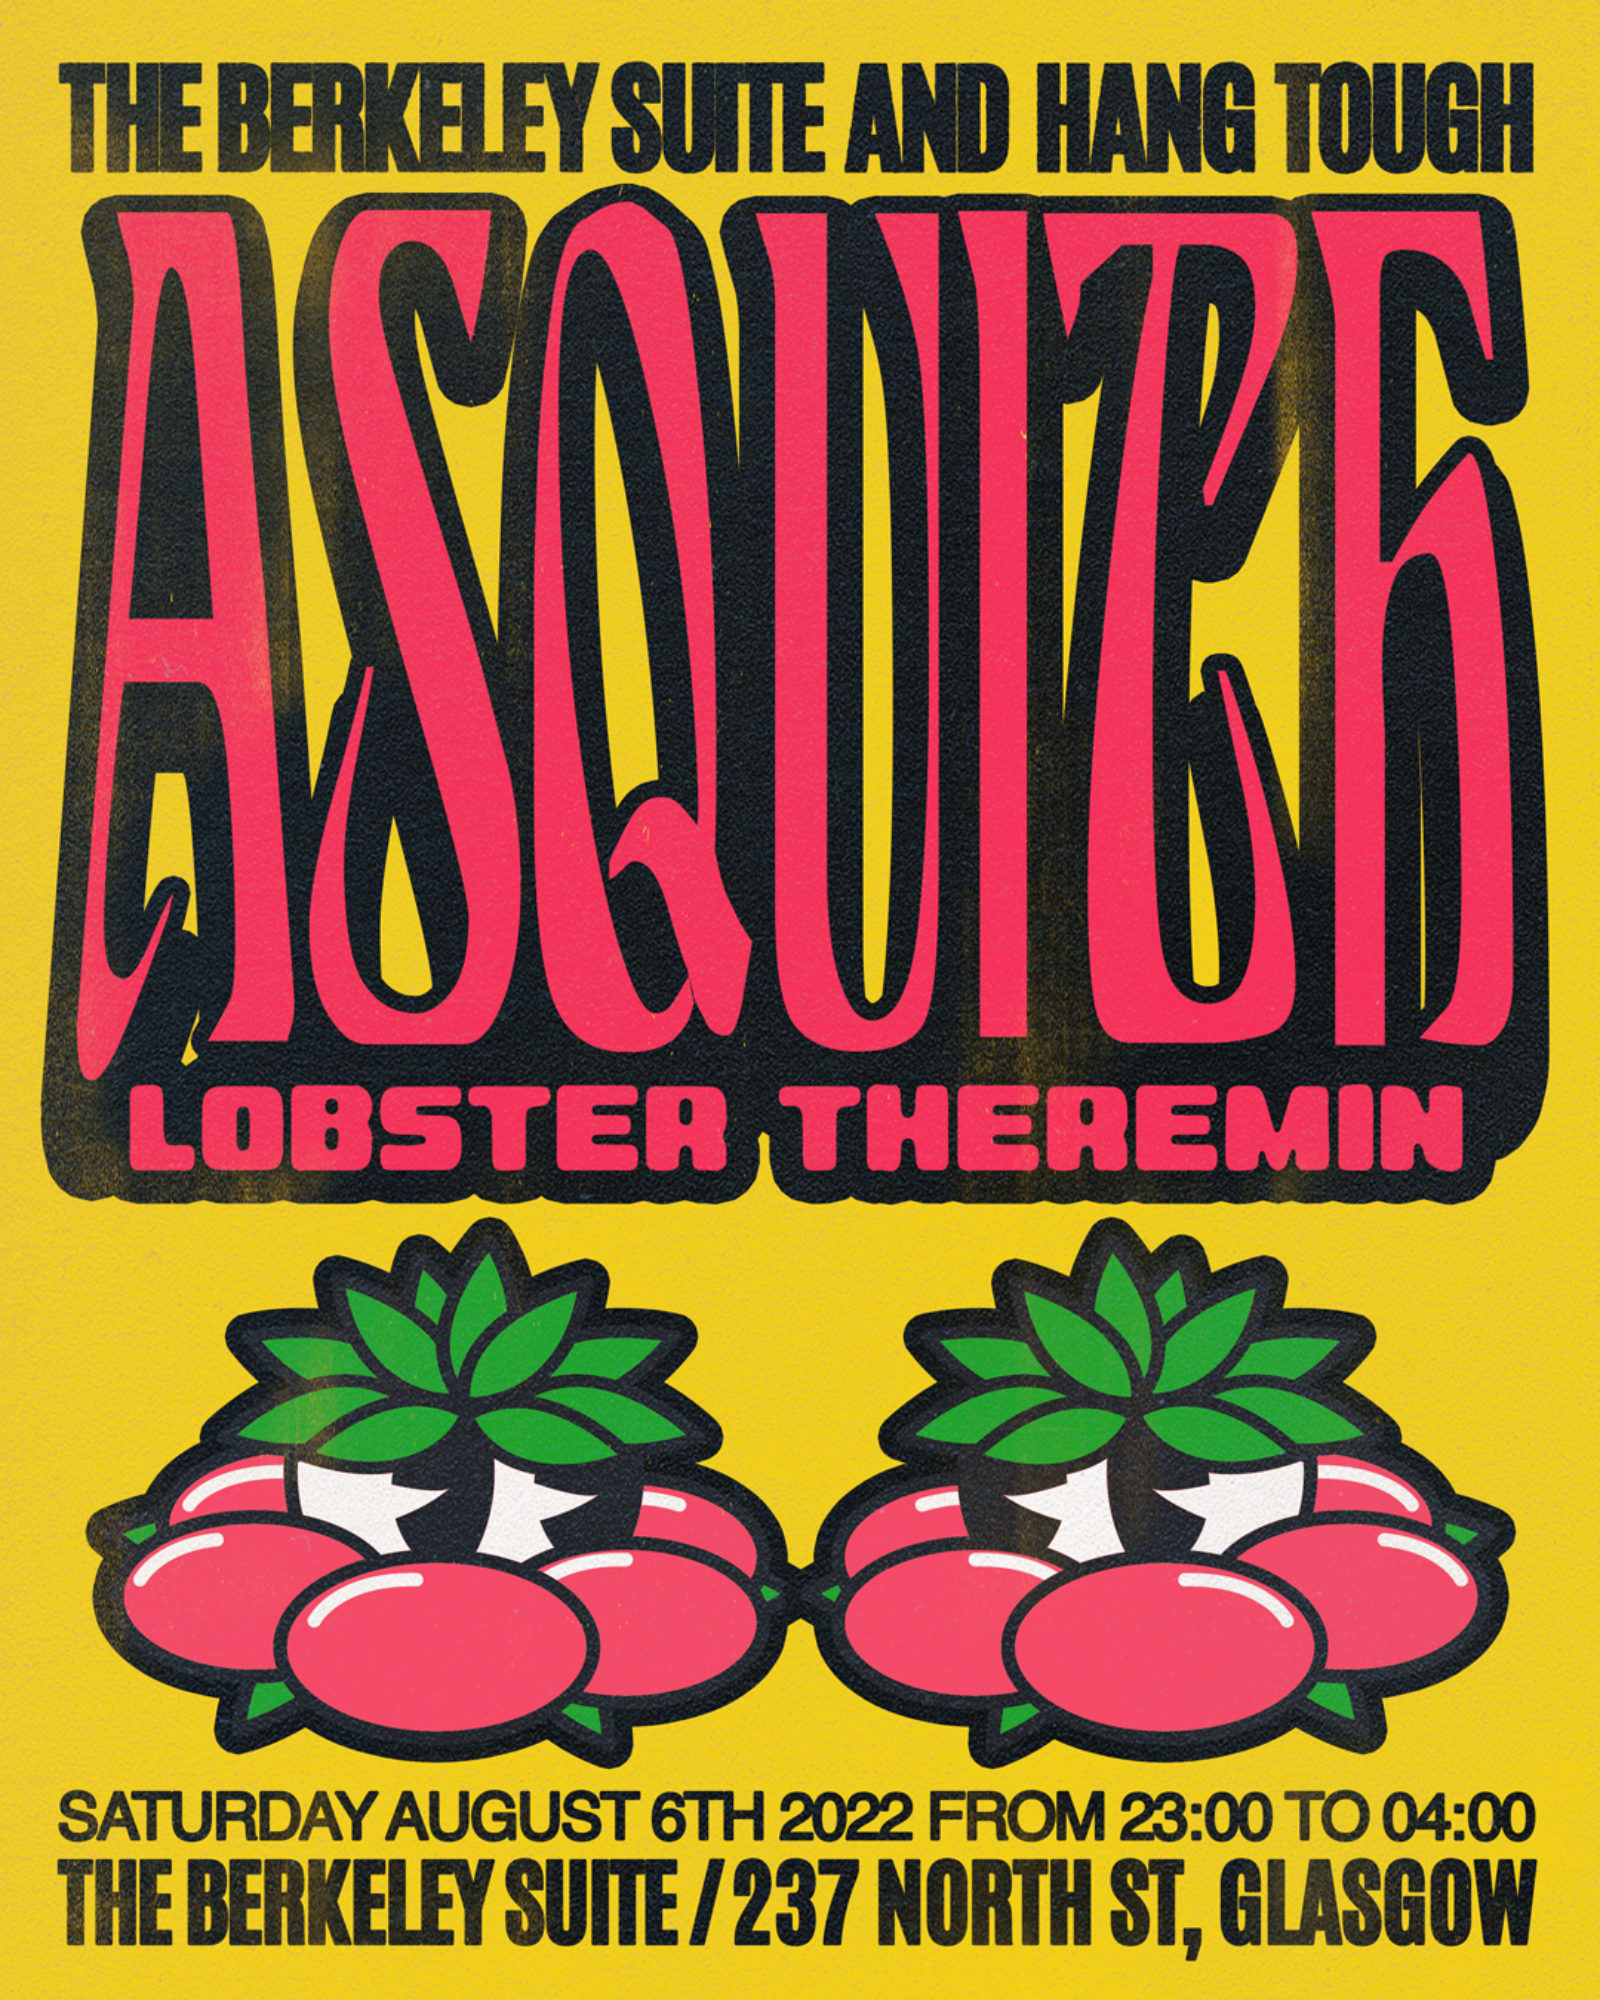 Berkeley Suite and Hang Tough presents ASQUITH